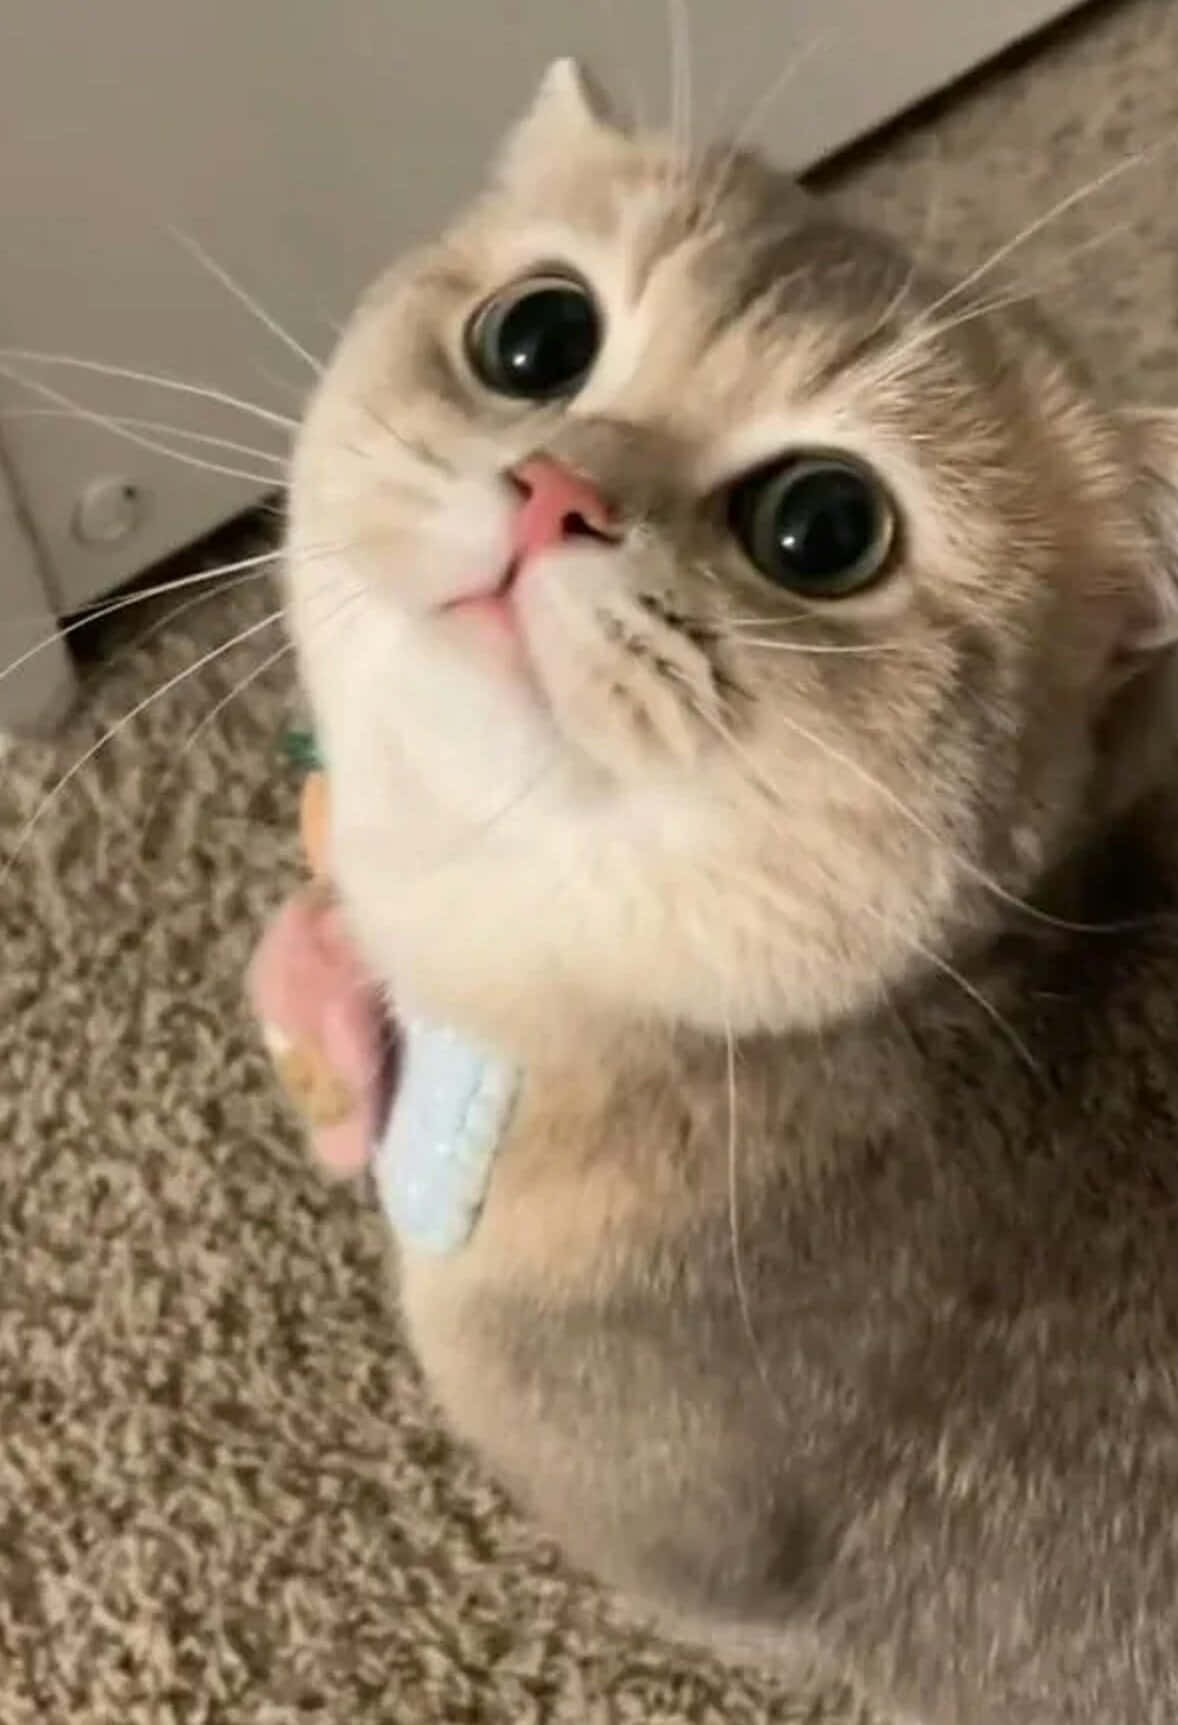 Look at this Adorable Kitty!